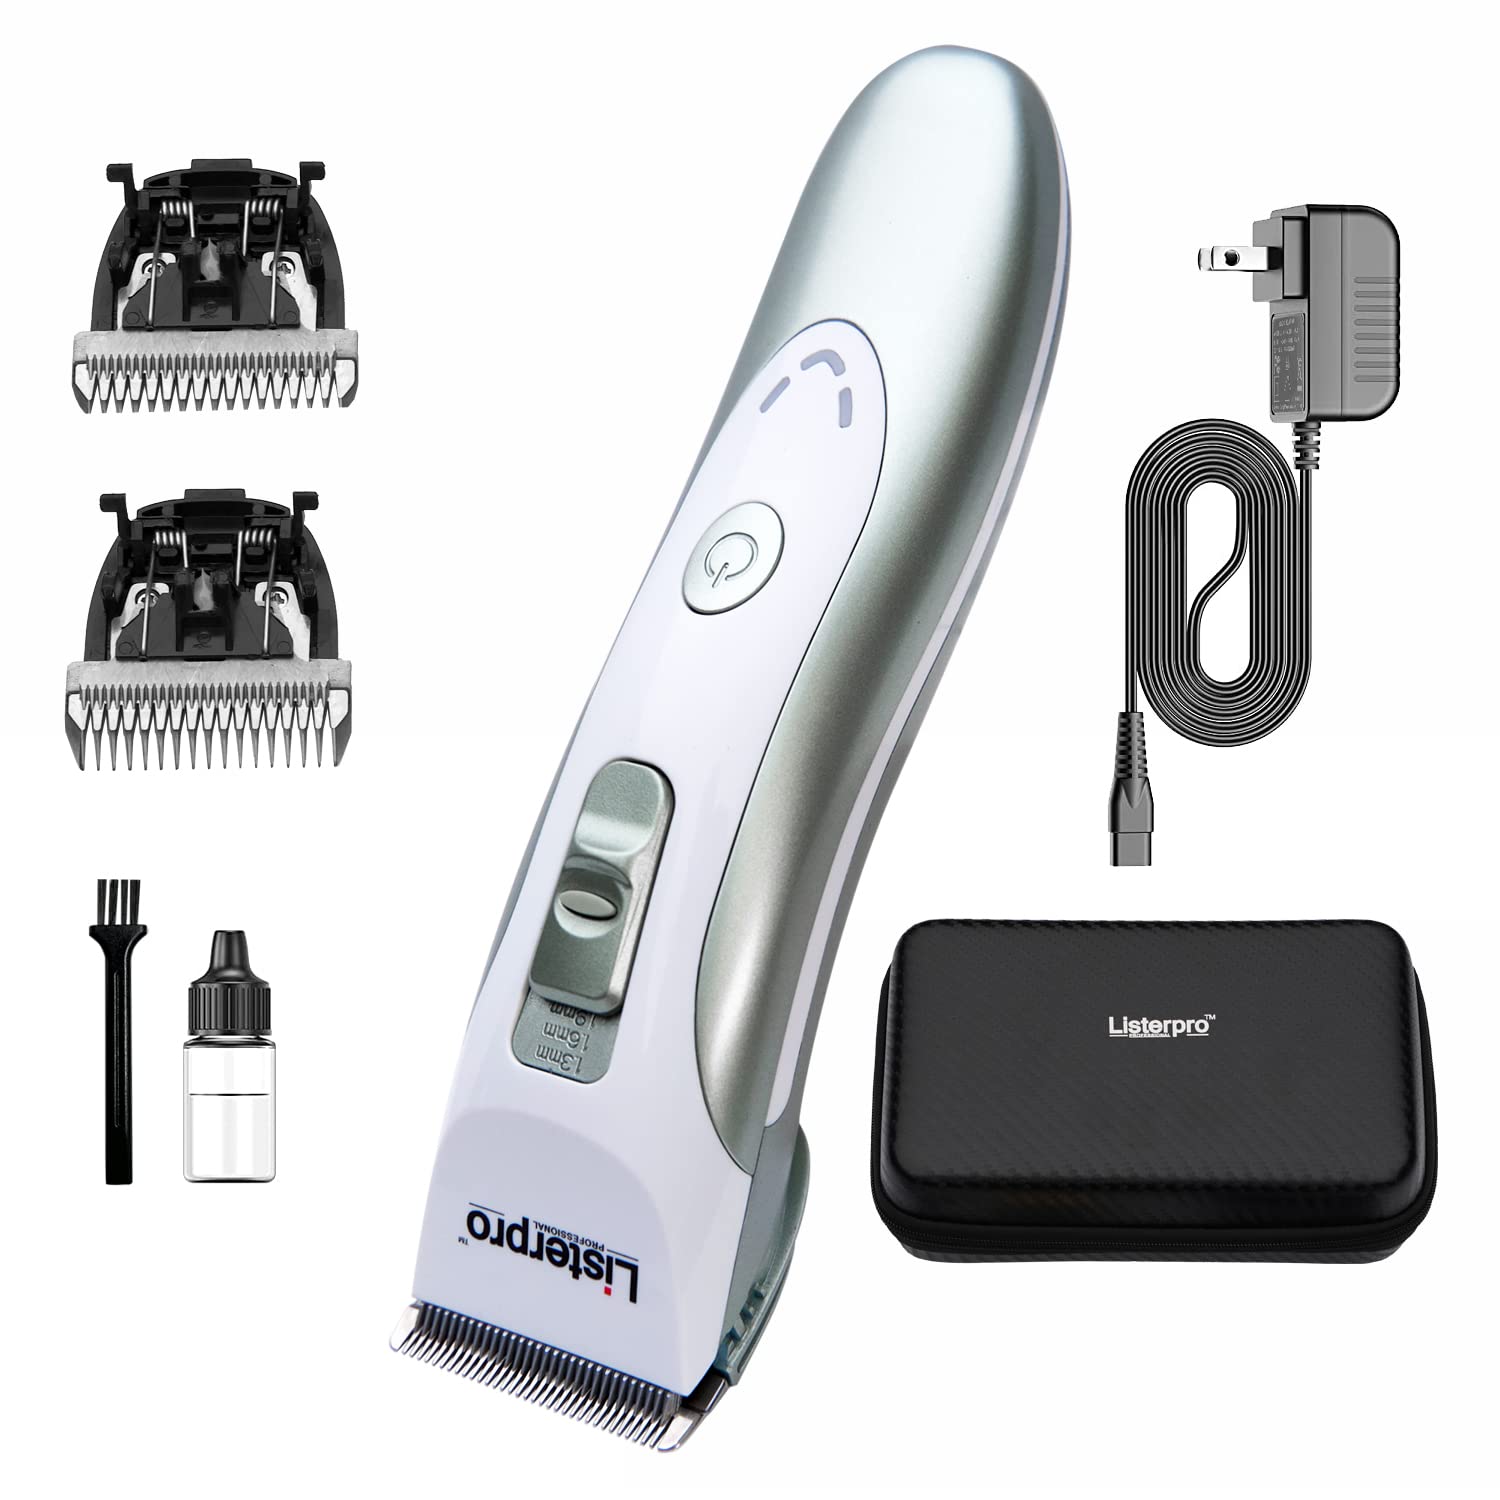 Listerpro Cat Grooming Clippers Dog Clippers Professional Heavy Duty Dog Grooming Clipper Low Noise High Power Rechargeable Cord